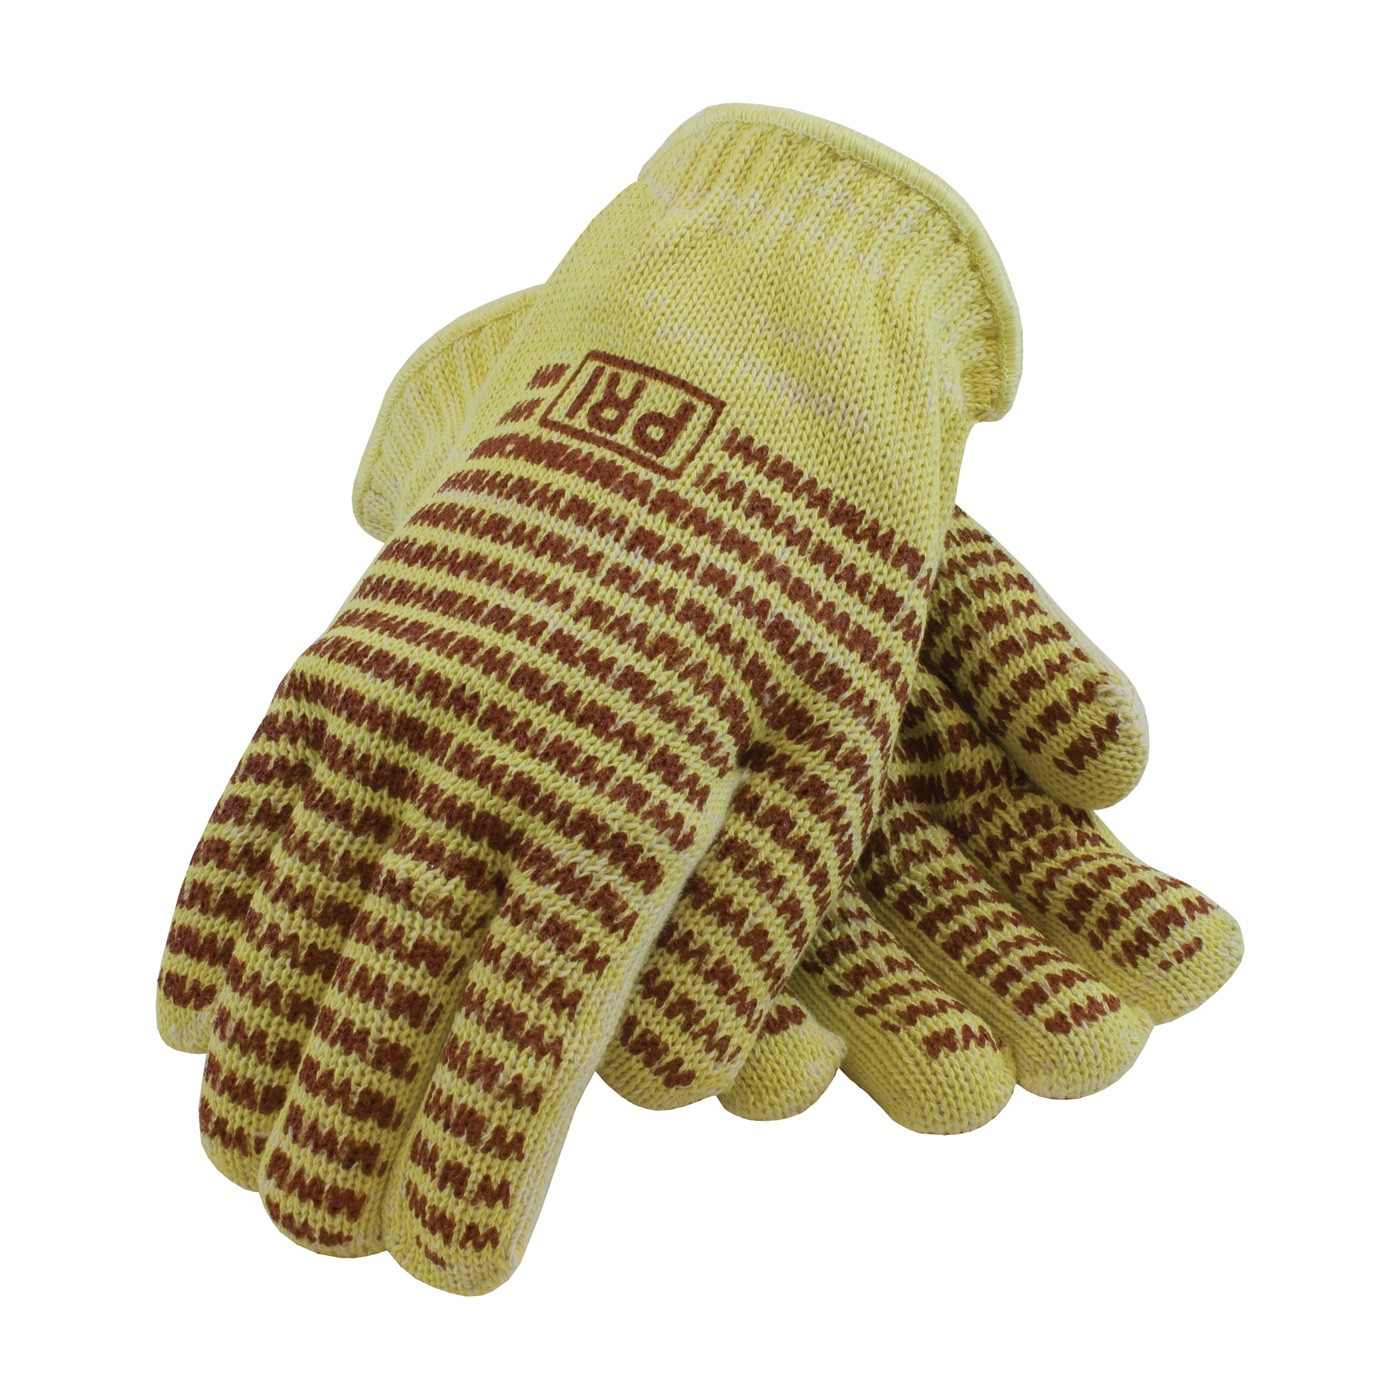 Glove Hotmil Kevlar/Cotton Outer w/ Cotton Lining Nitrile Coating Sm 8/DZ